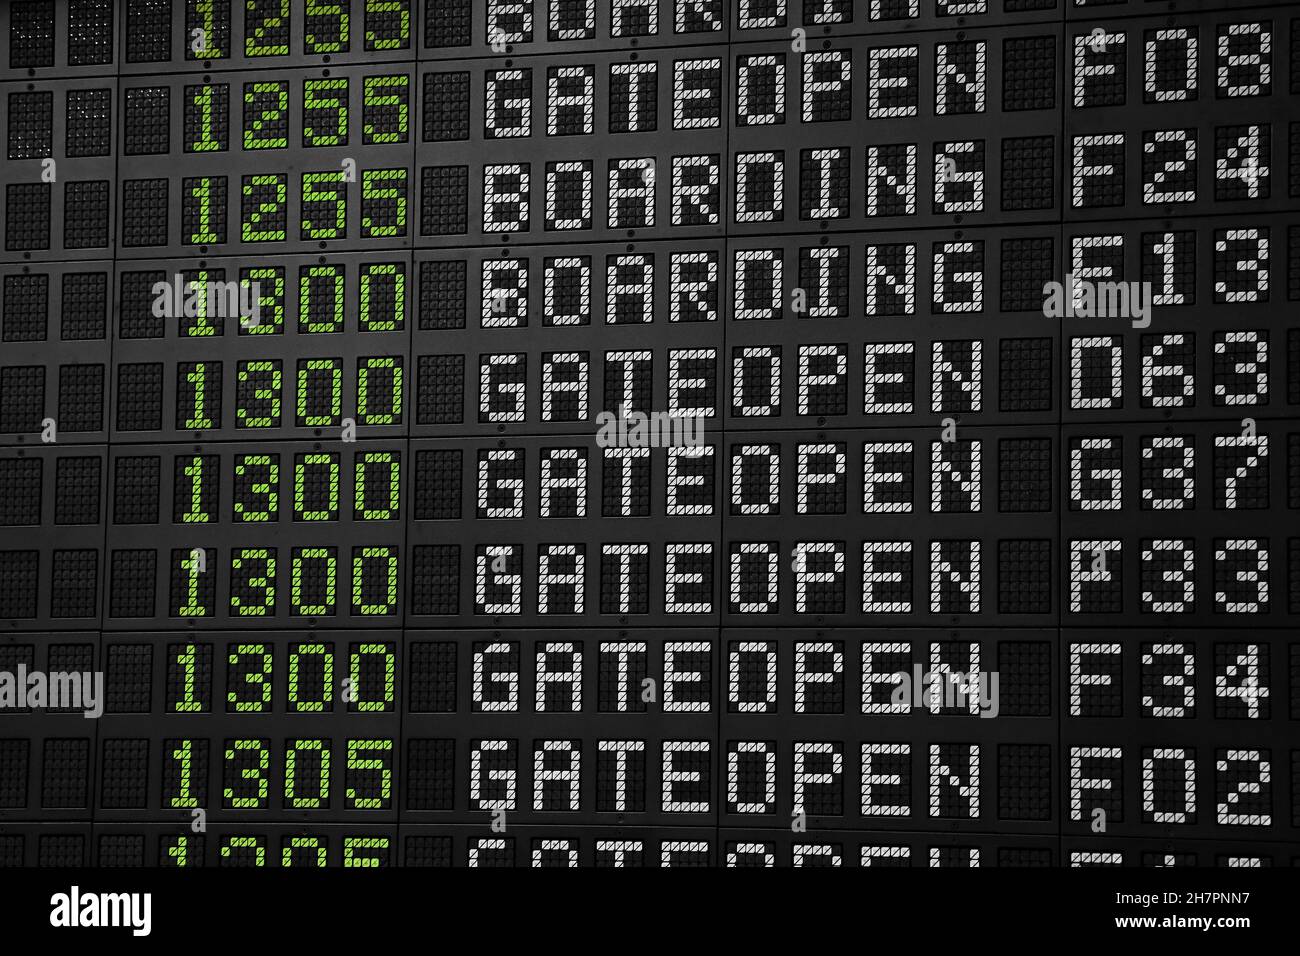 Flight information panel desk at airport, with time, flight number, boarding and gate open messages, close up, low angle view Stock Photo